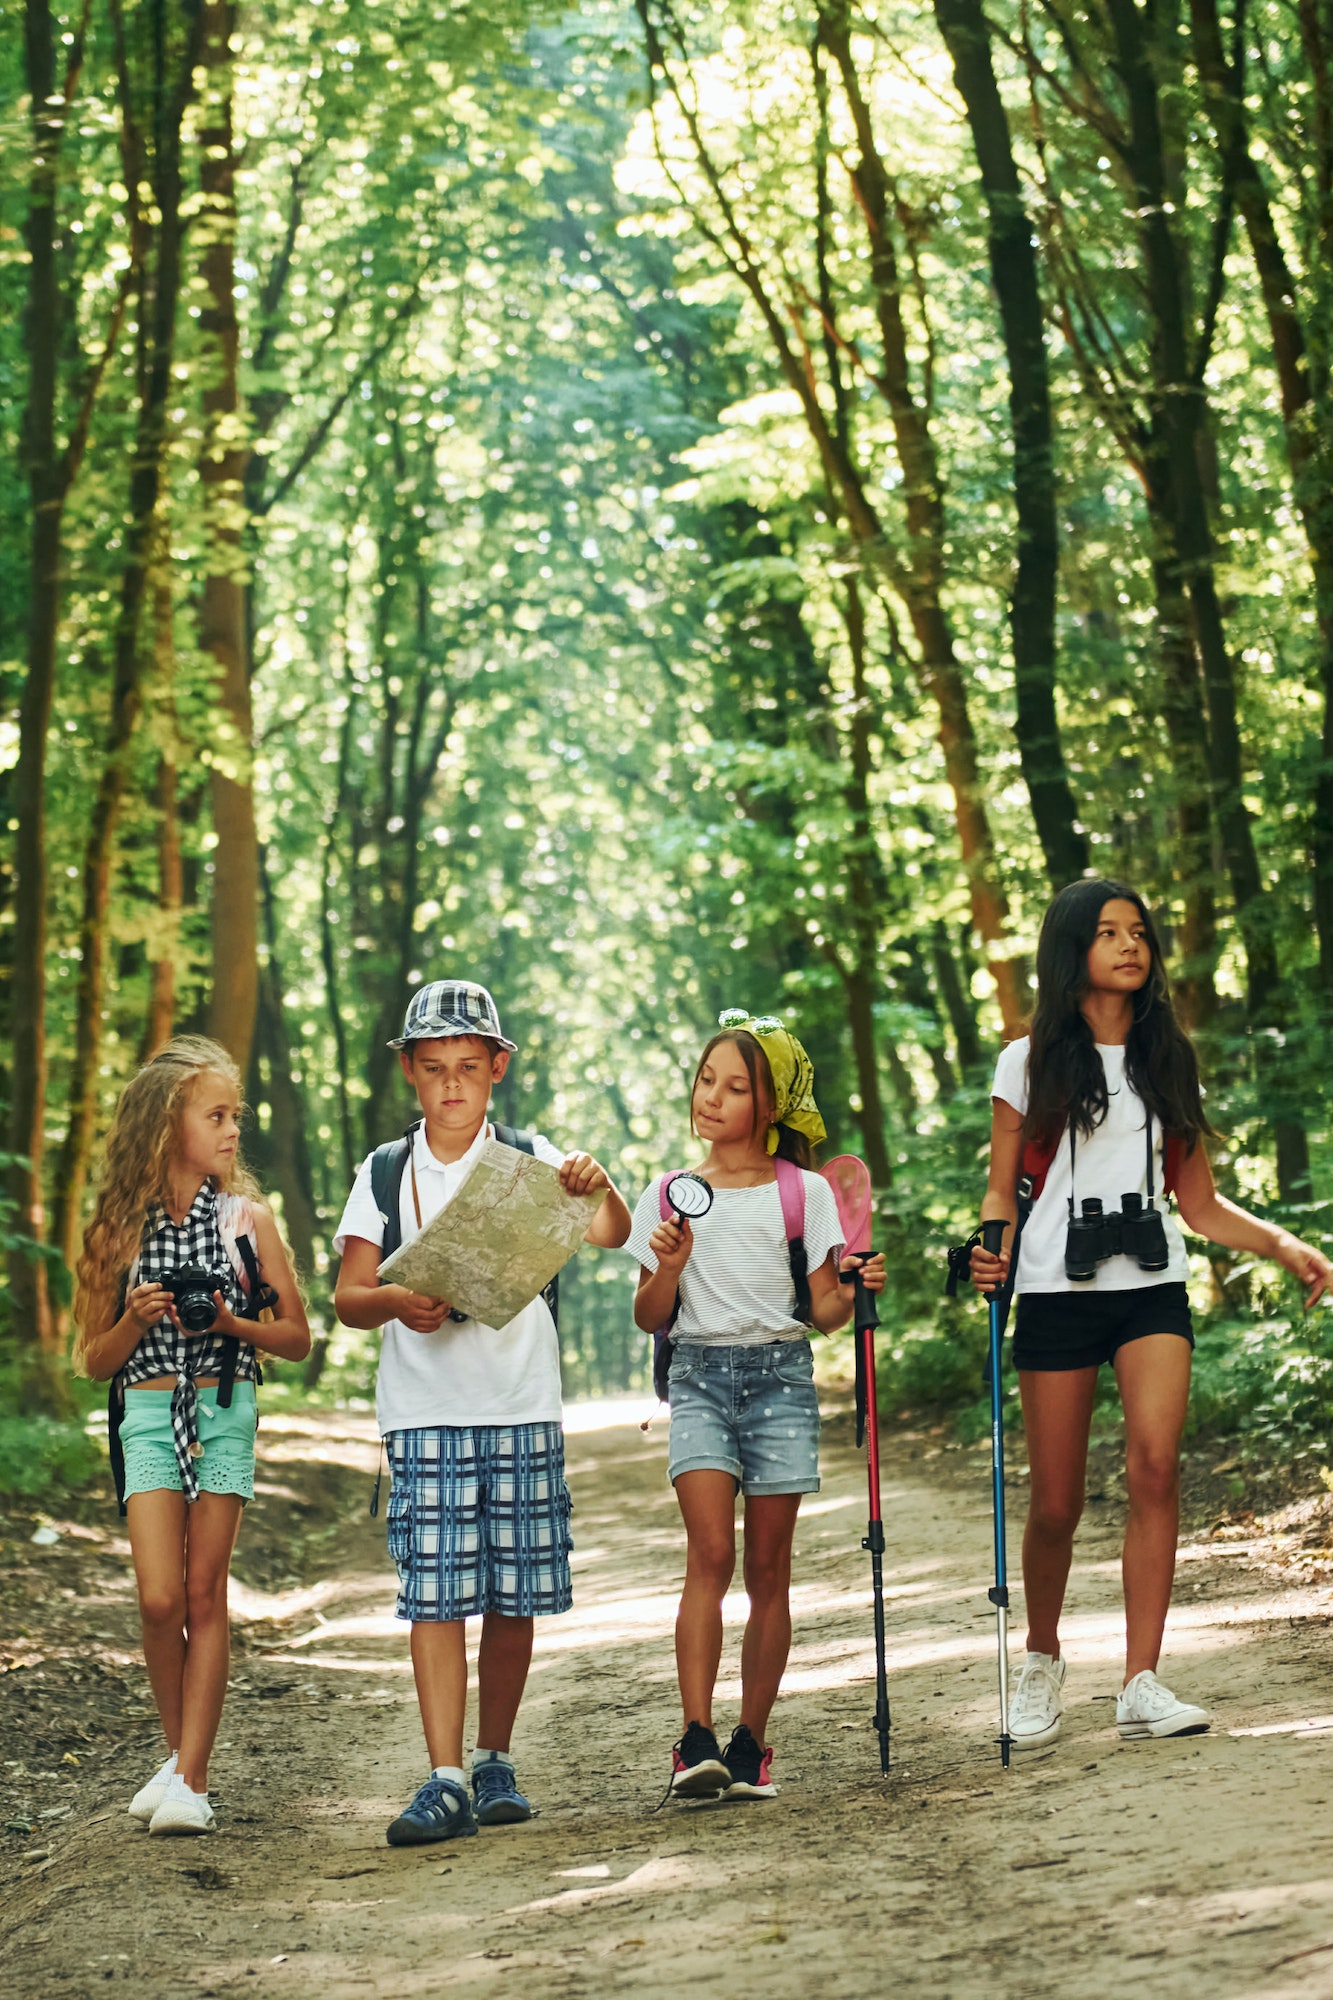 With map. Kids strolling in the forest with travel equipment